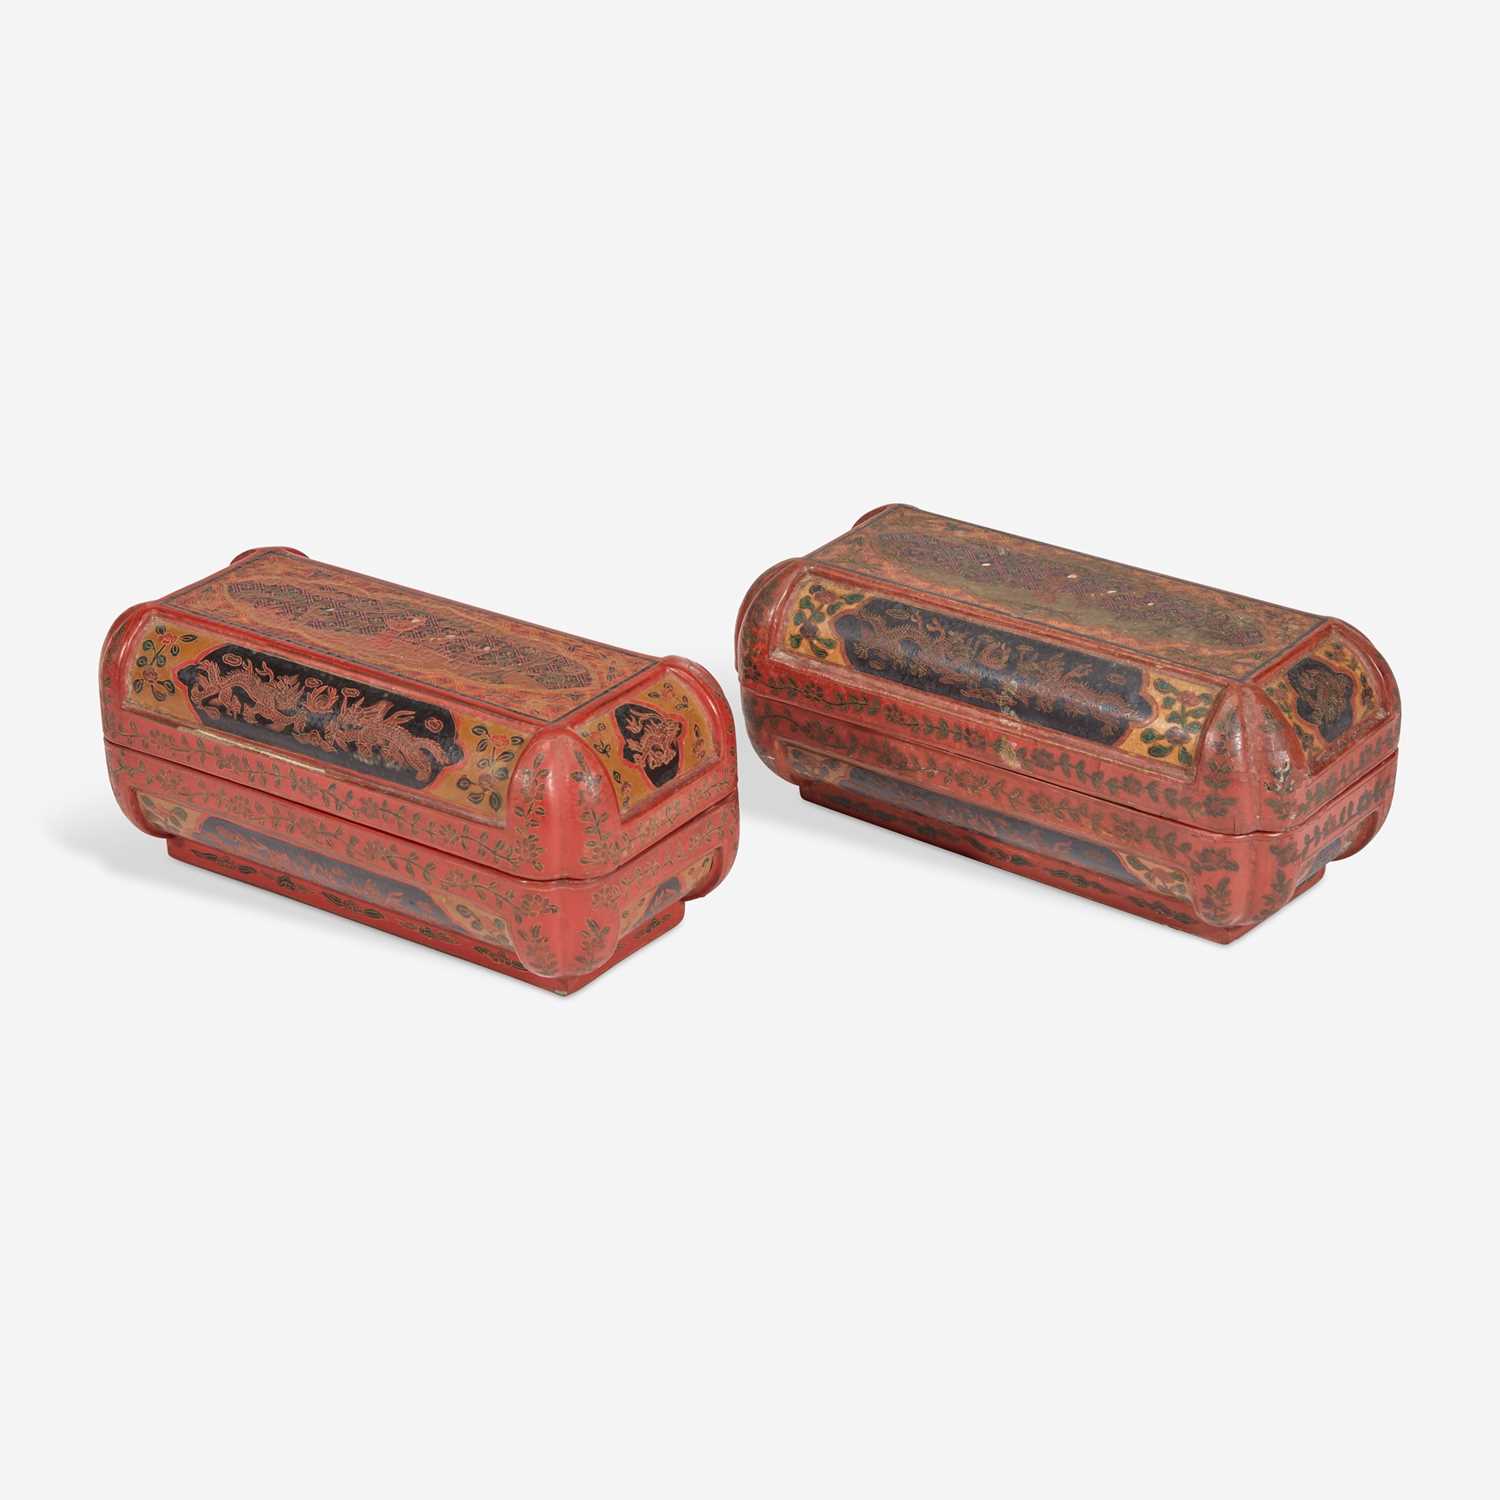 Lot 44 - An associated pair of Chinese incised lacquer boxes 戗金漆盒一对